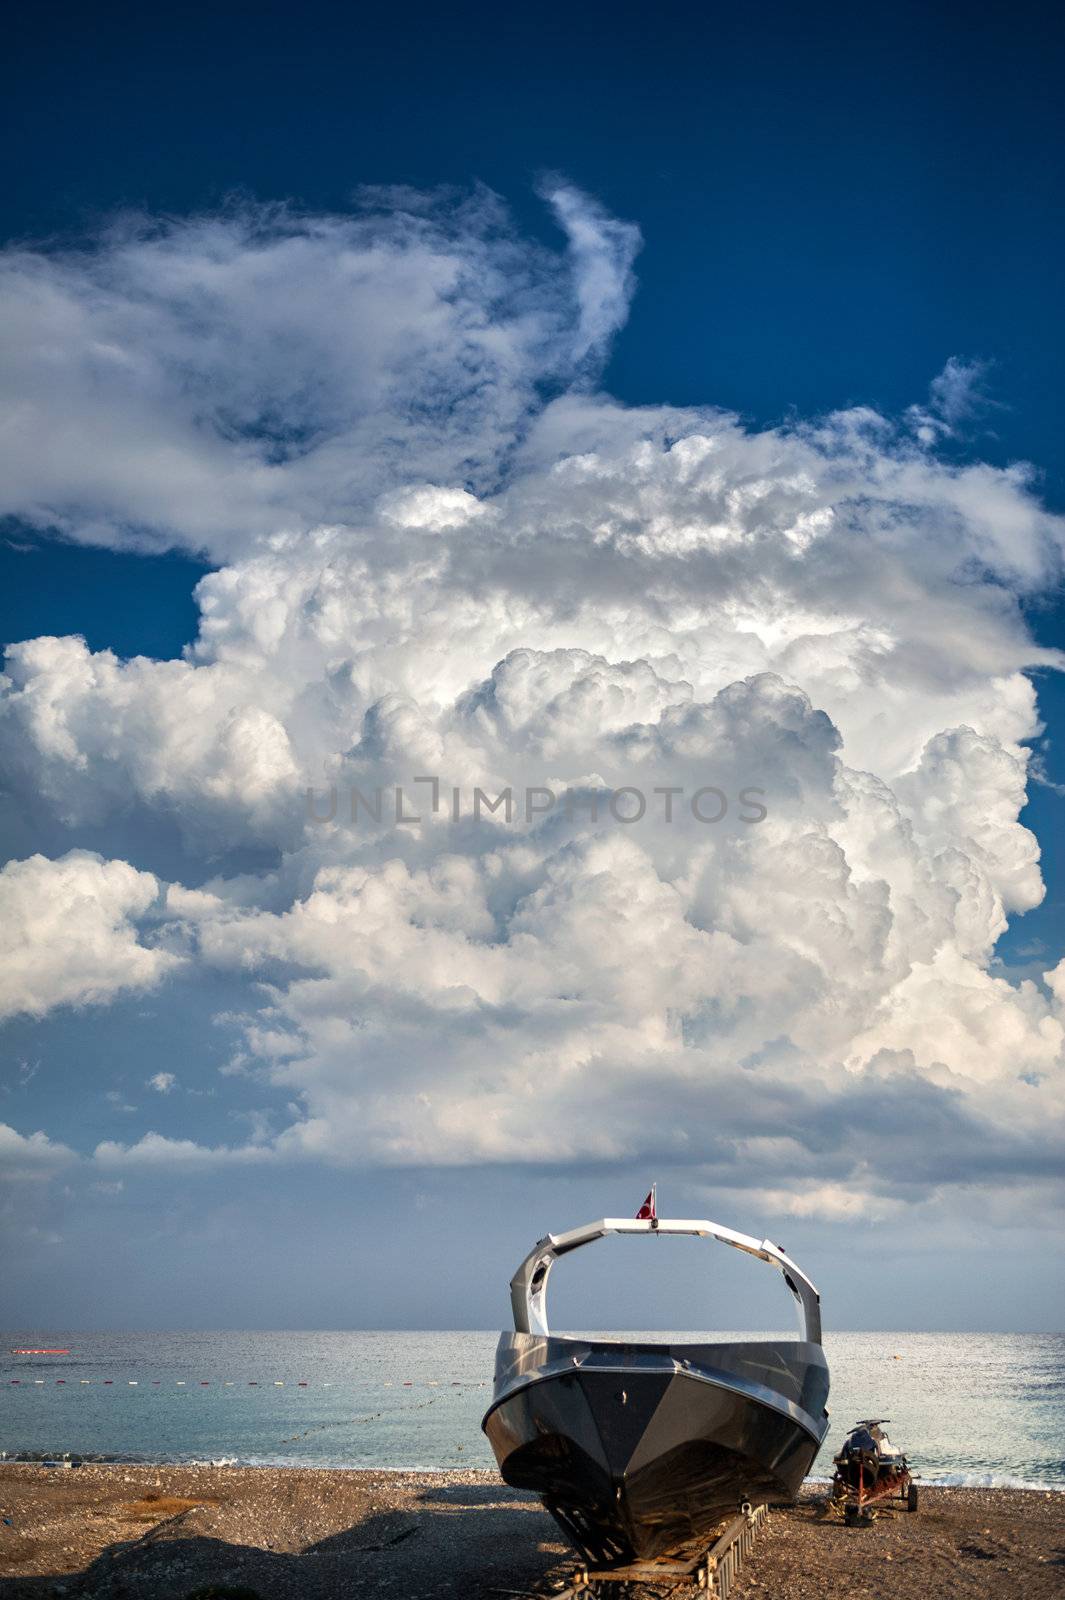 Sports boat and scooter on the beach over dramatic sky with cumulus clouds